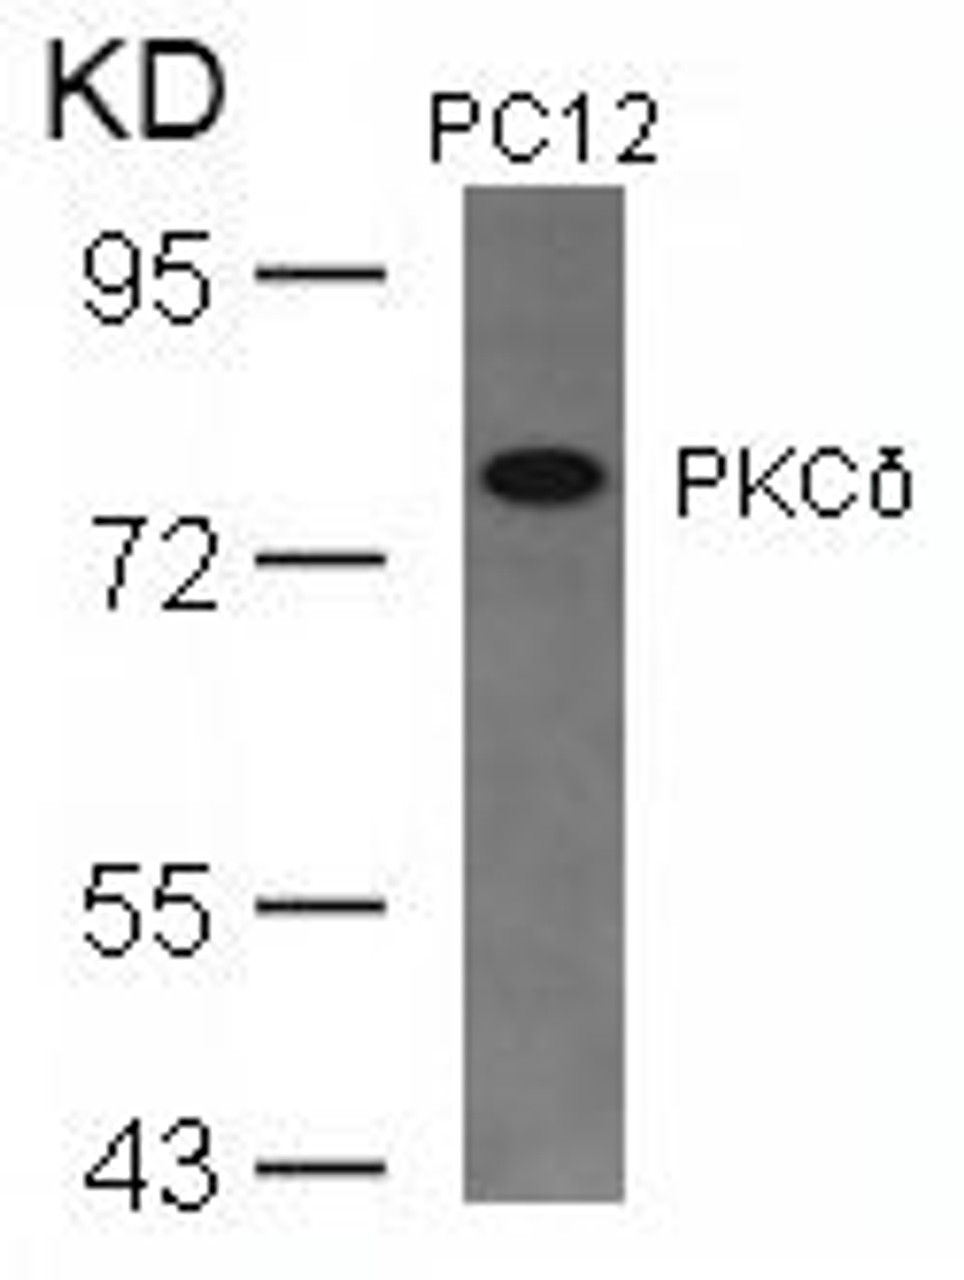 Western blot analysis of lysed extracts from PC12 cells using PKC&#948; (Ab-645) .